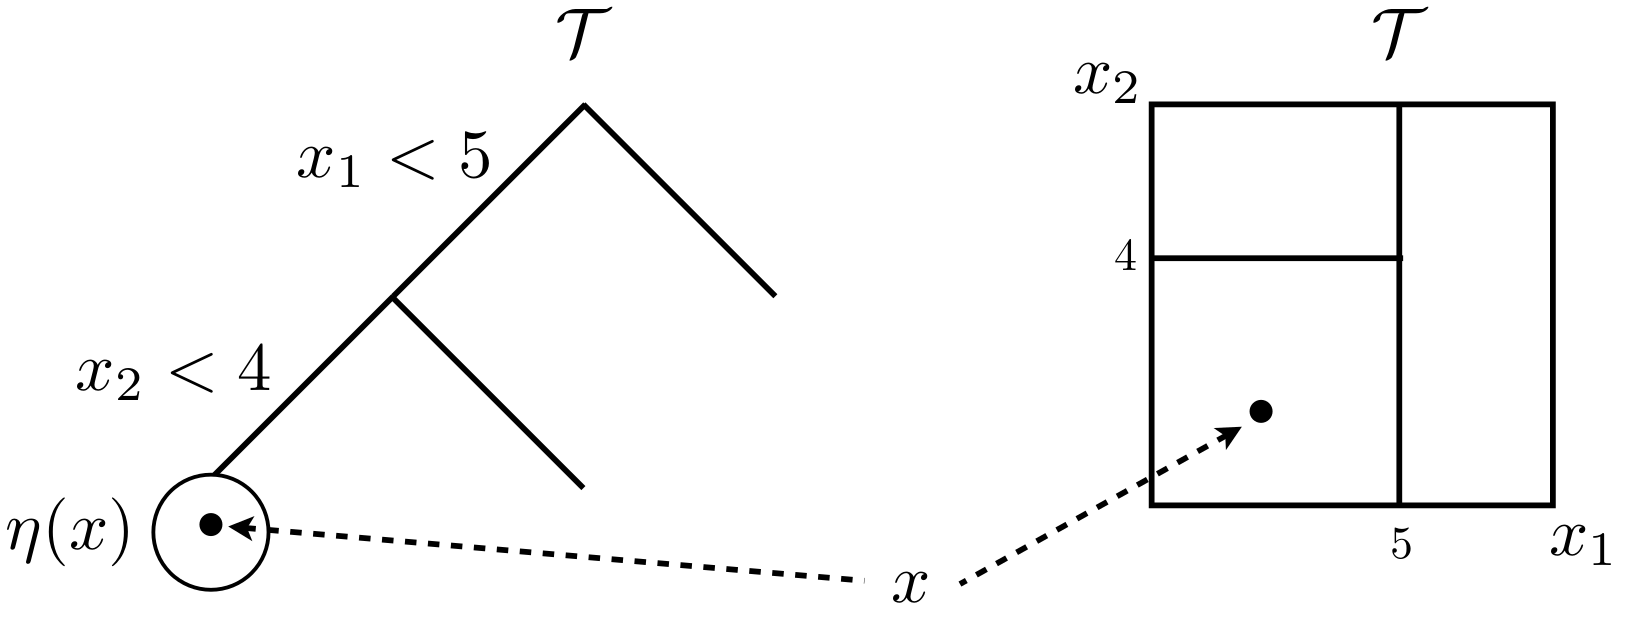 Tree graph (left) and partition of a 2d input space (right). Borrowed from H. Chipman et al. (2013) with many similar variations elsewhere; used with permission from Wiley.